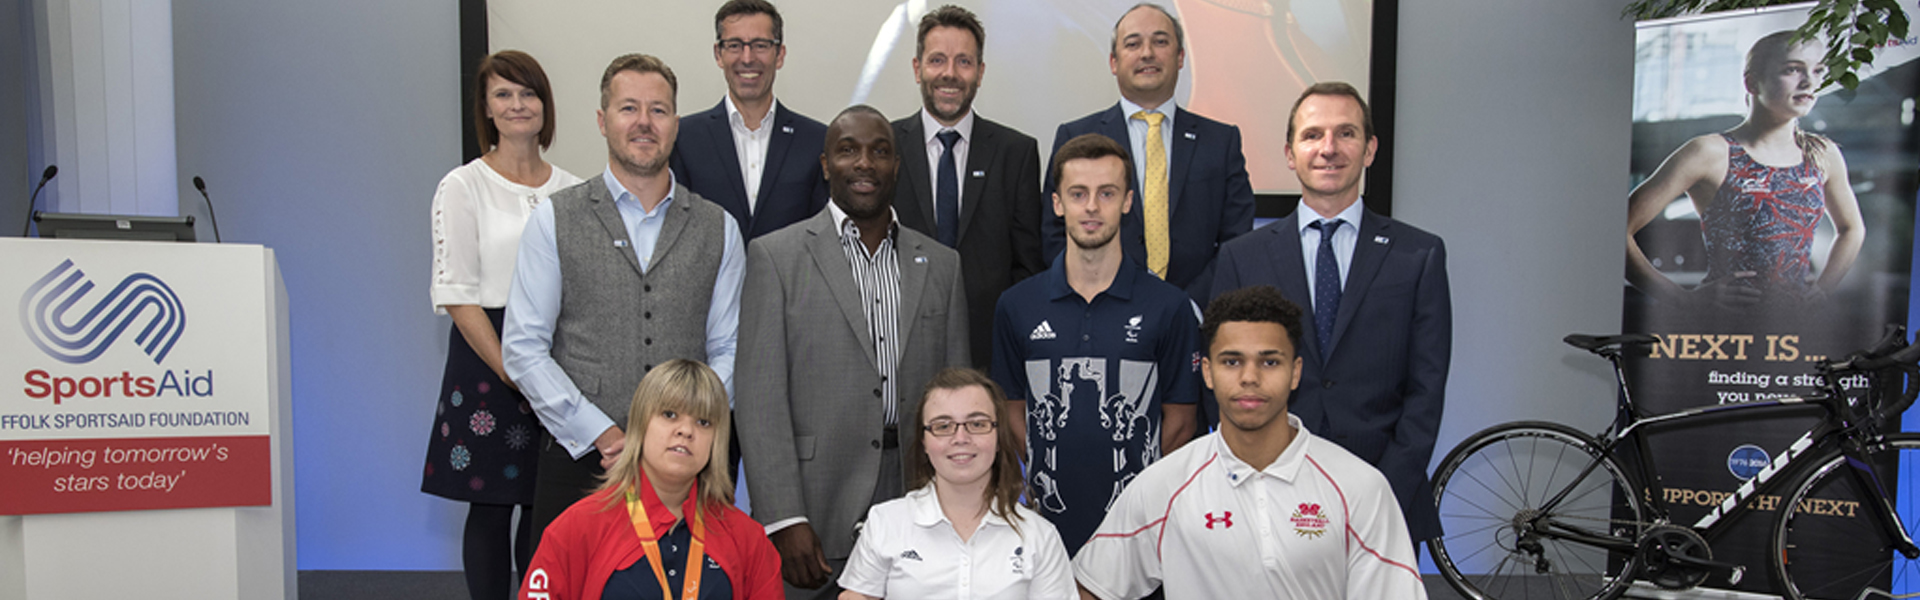 Rio Paralympians and Olympic legend help raise money for the next generation